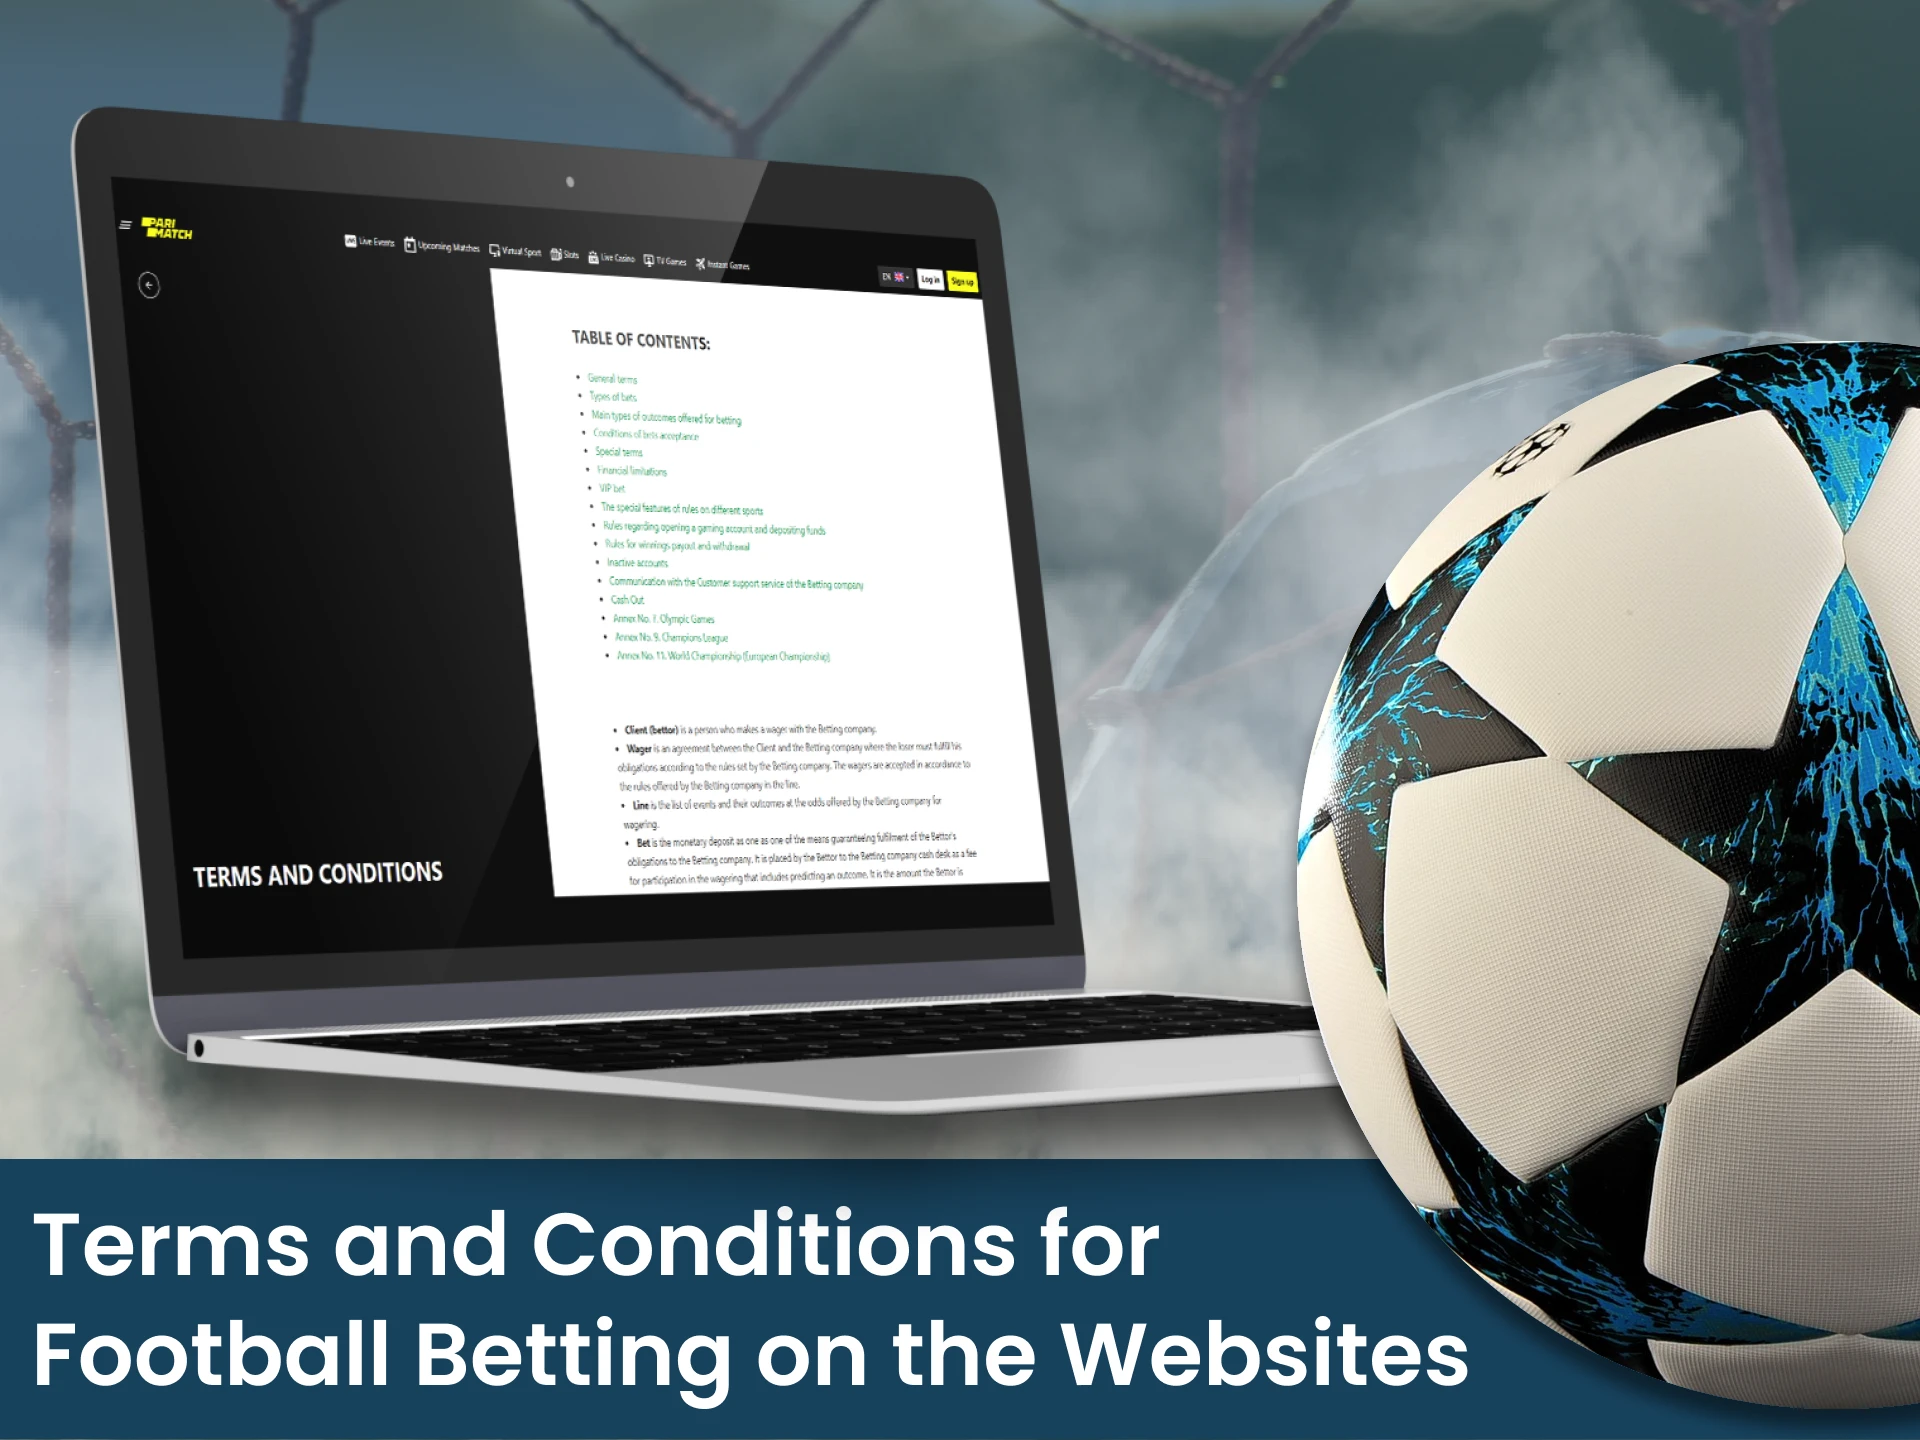 Read these terms to bet online safely.